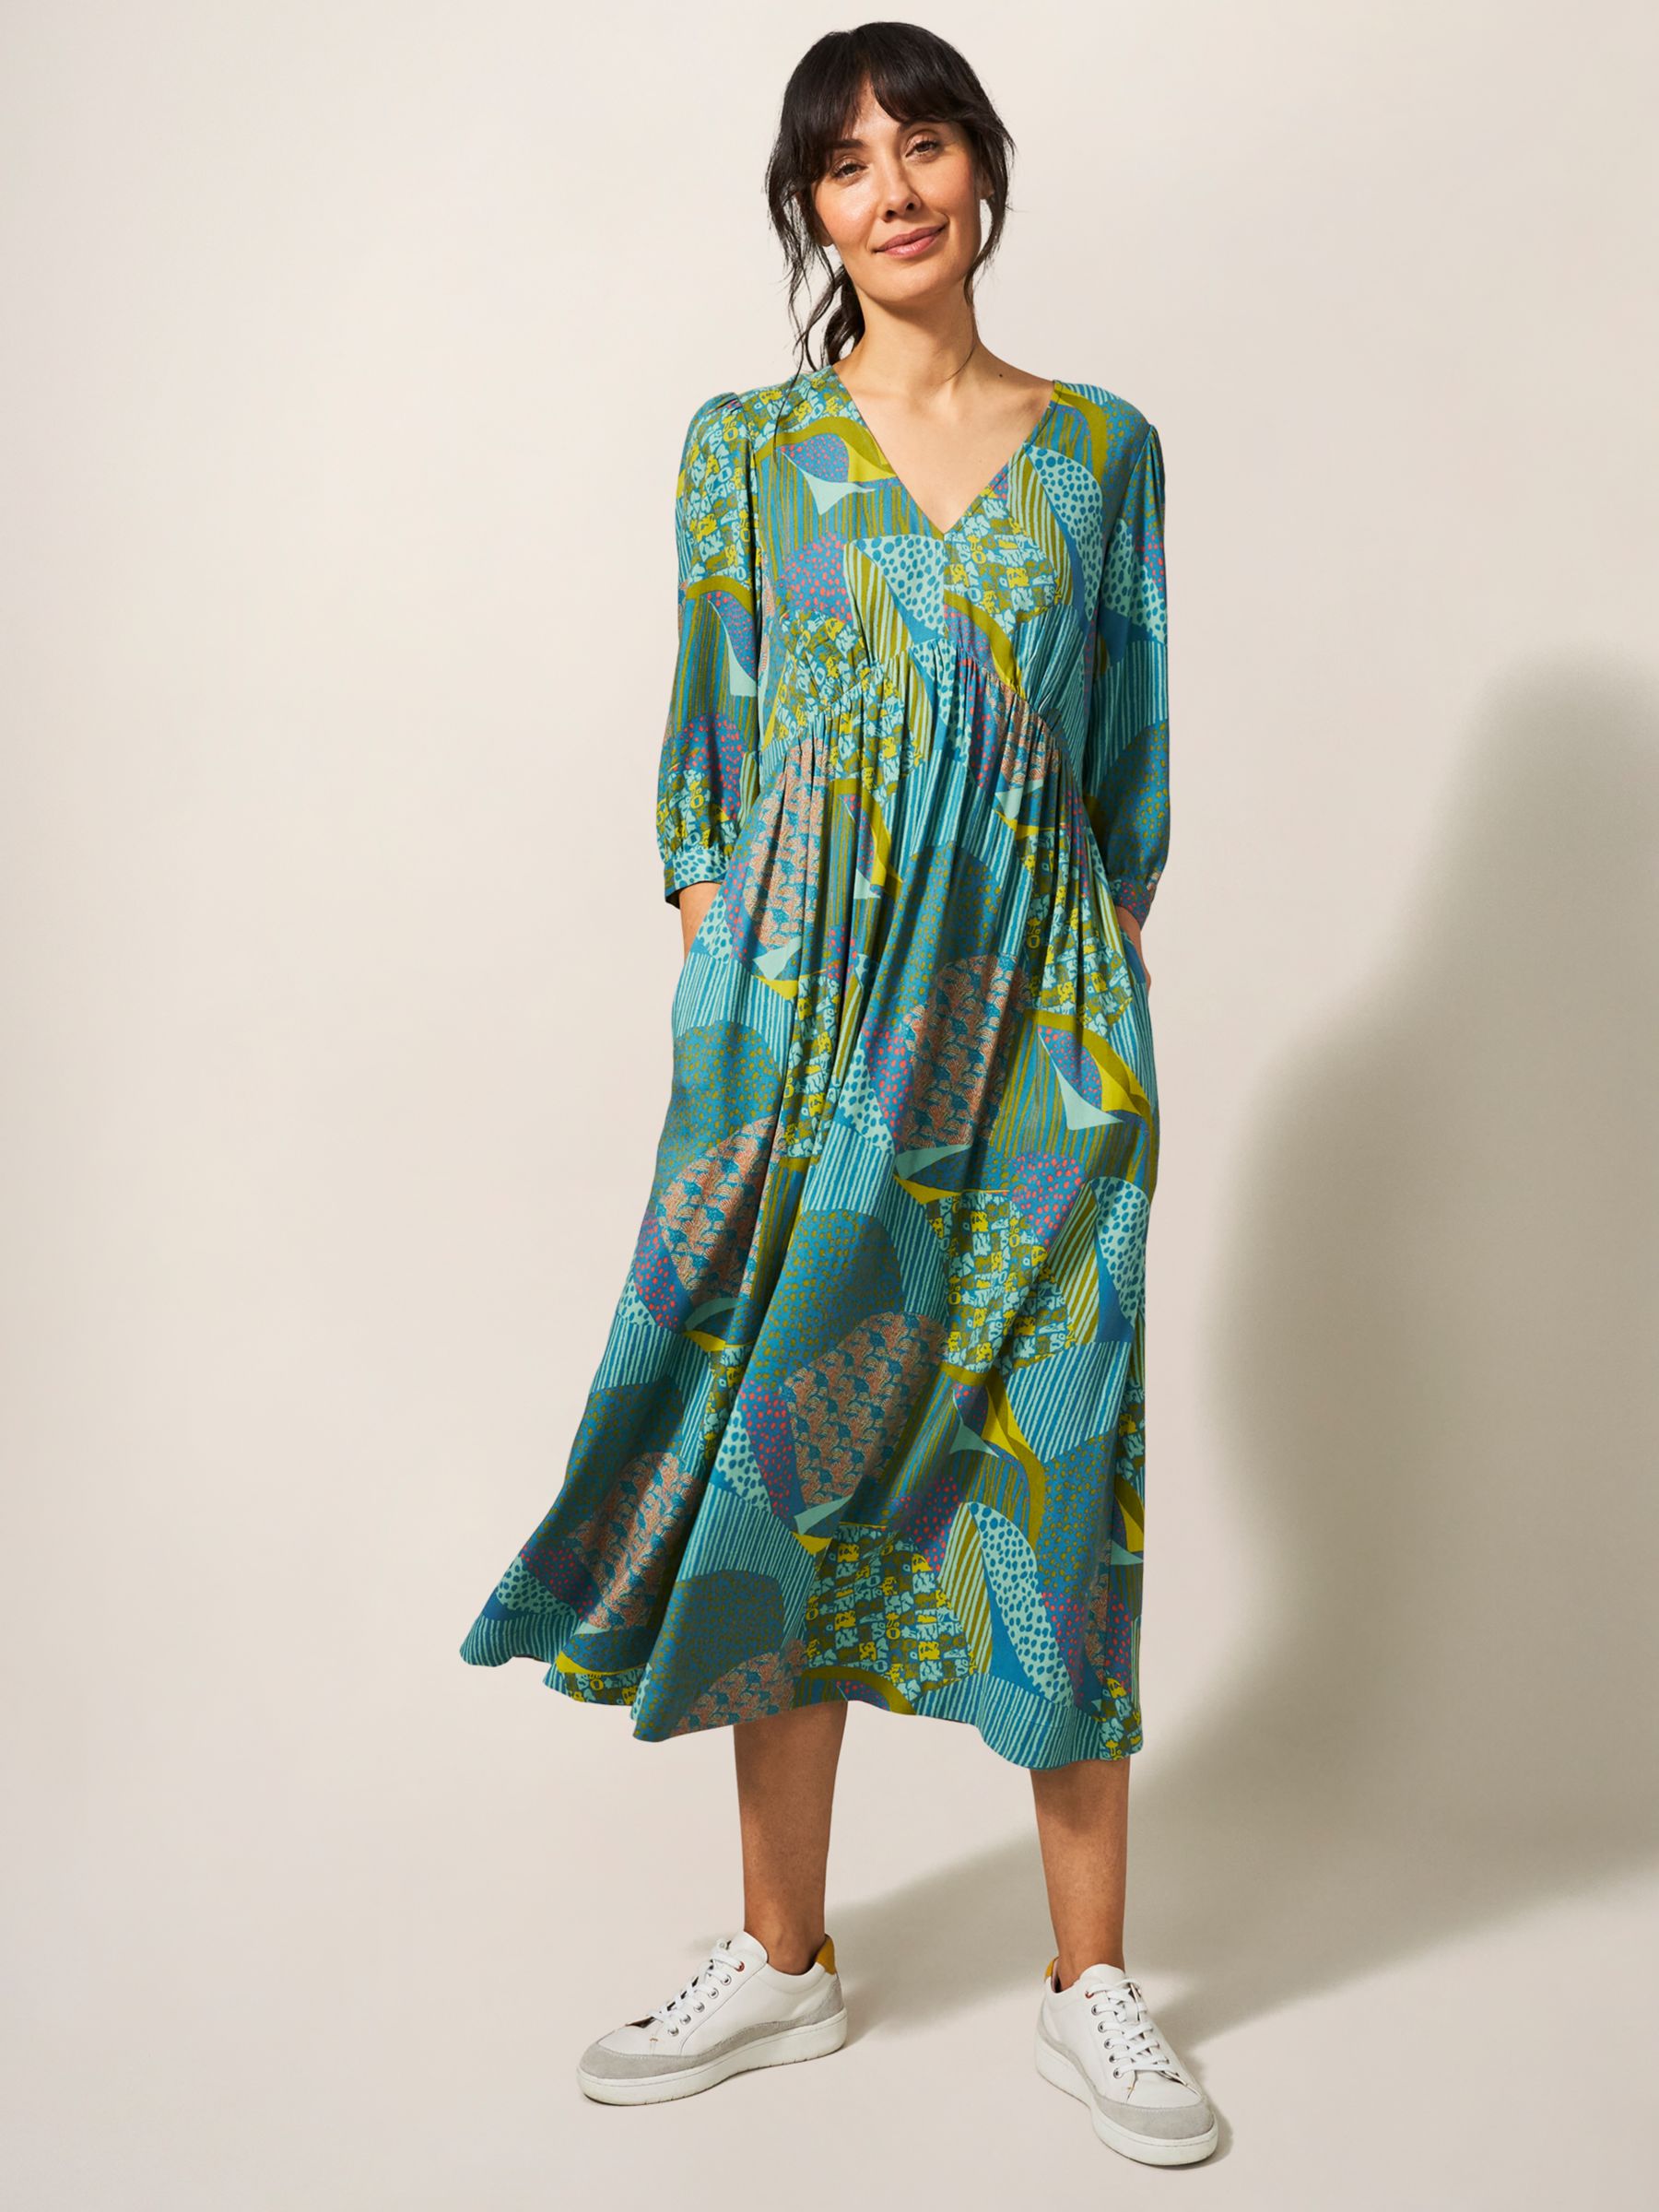 White Stuff Lucy Abstract Print Midi Dress, Teal/Multi